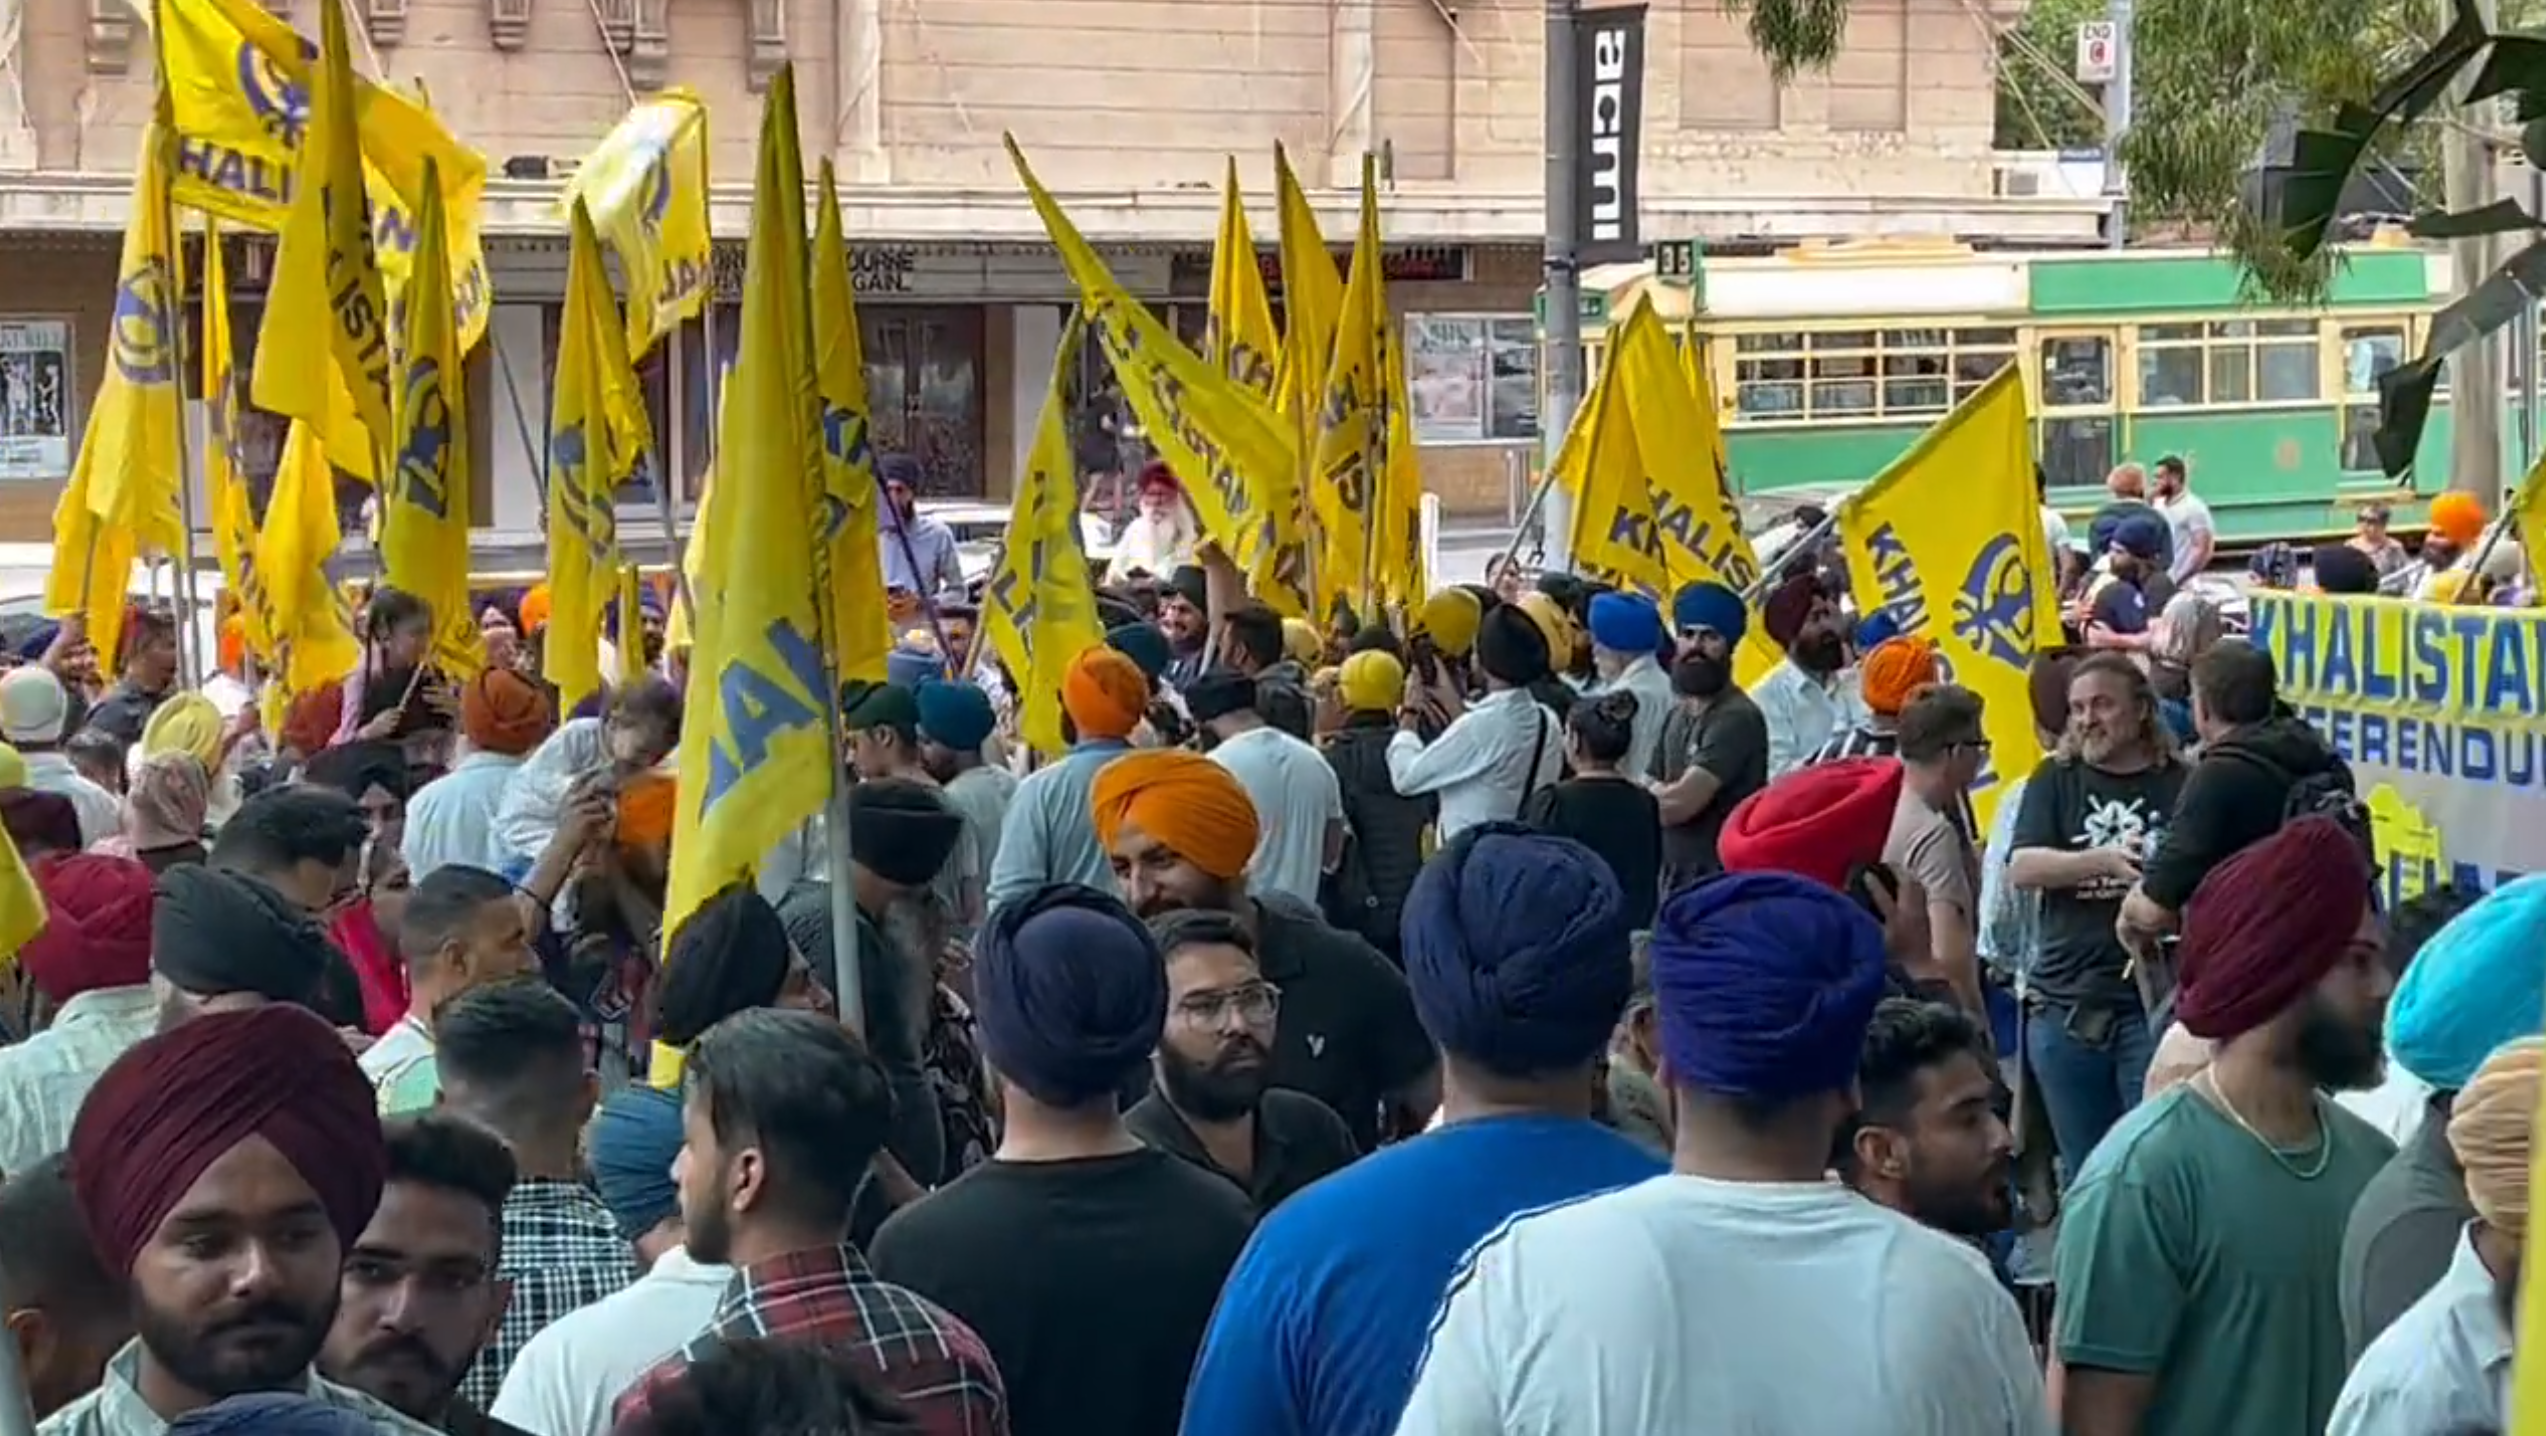 a large number of demonstrators queued outside the khalistan referendum voting centre in melbourne australia on january 29 2023 image courtesy twitter jagdeepsingh ny